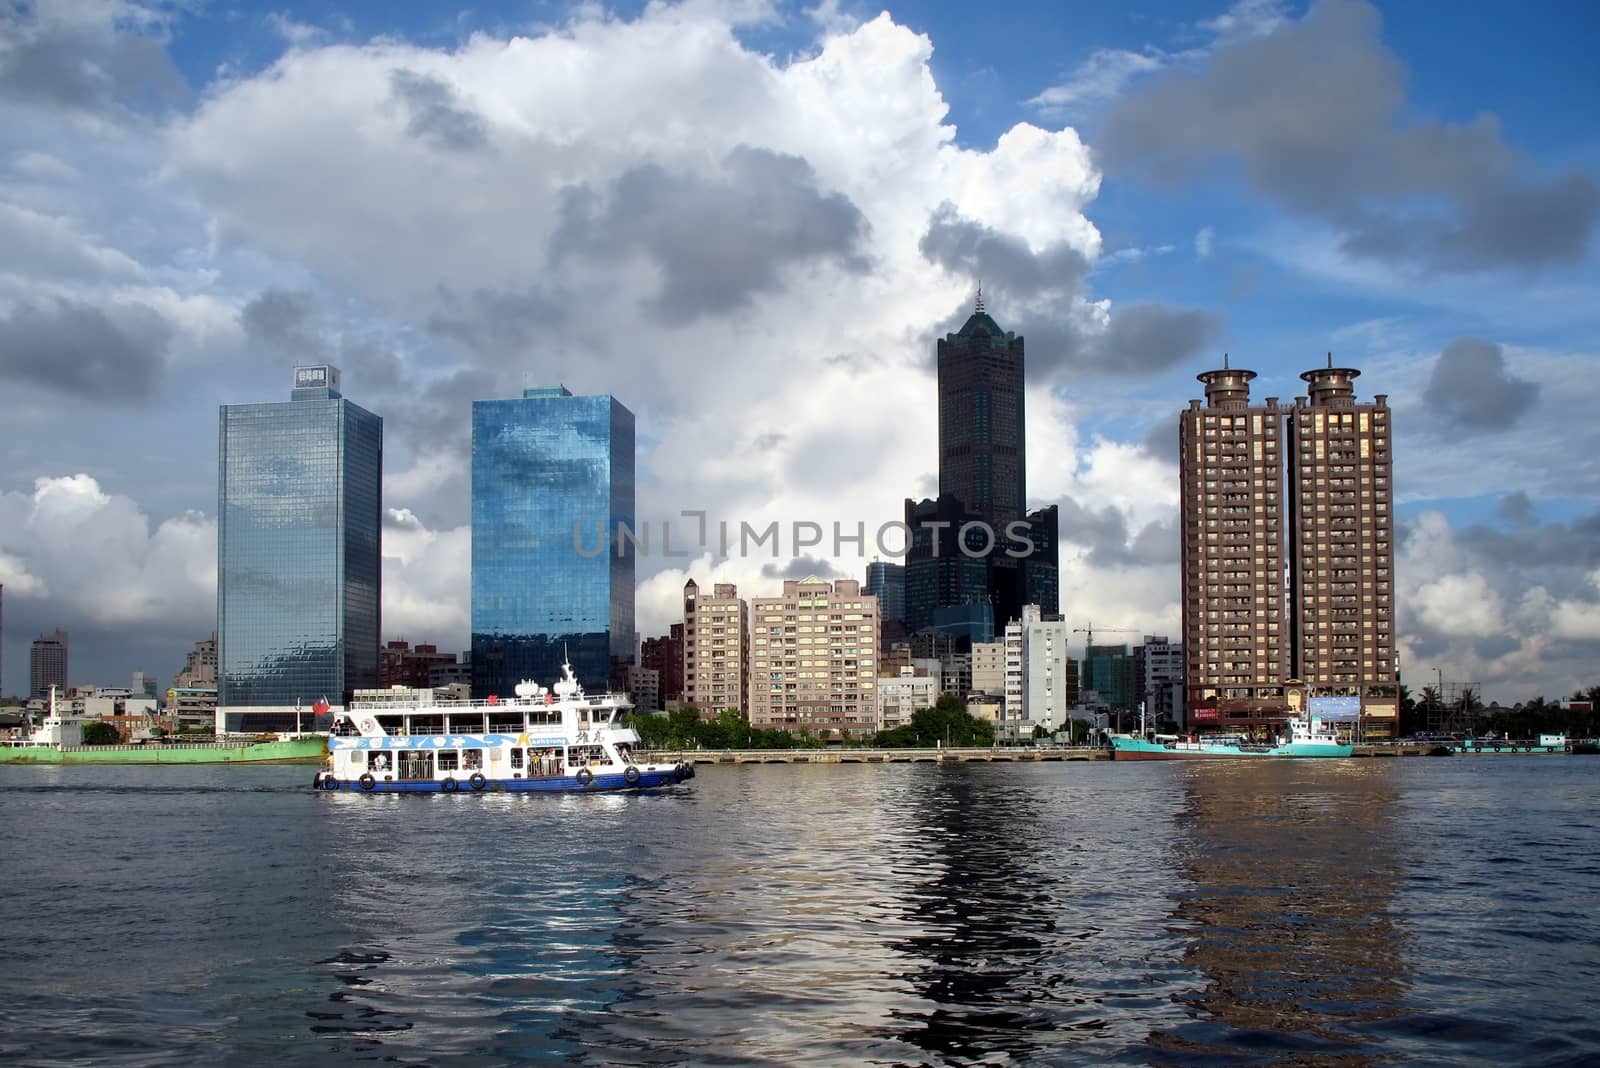 Kaohsiung City from the Water by shiyali